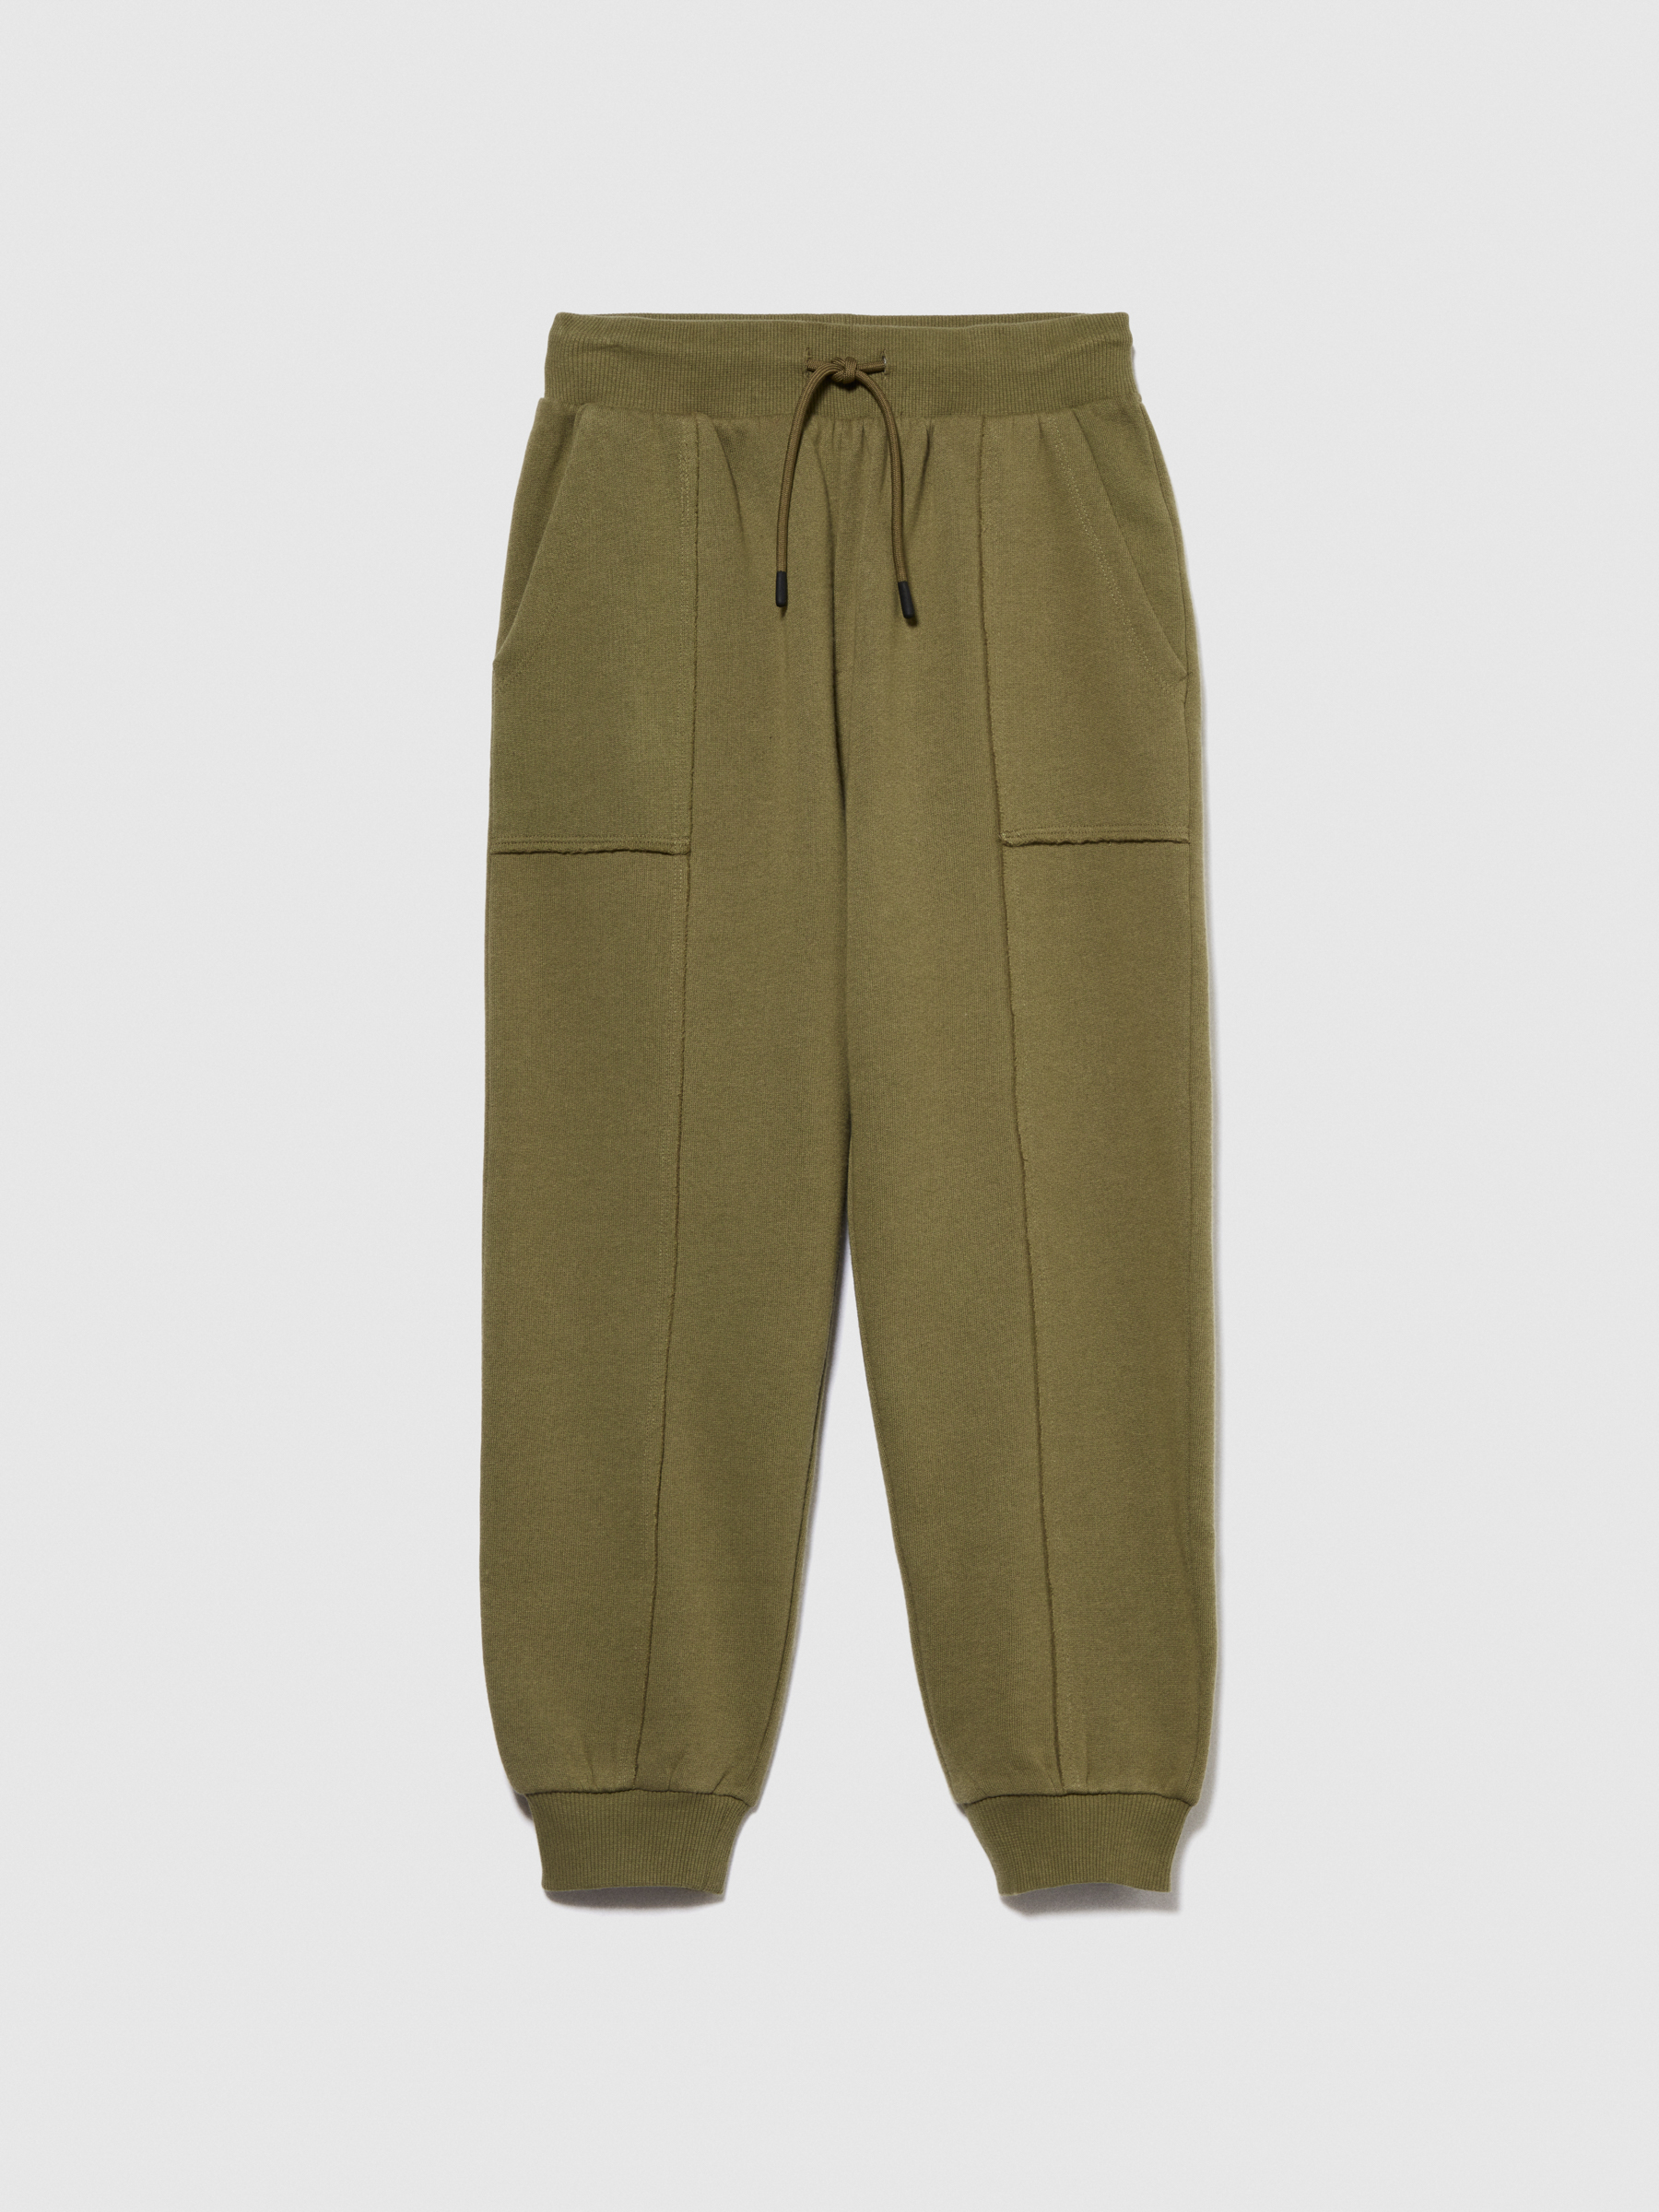 Sisley Young - Oversized Sweat Joggers, Man, Military Green, Size: KL